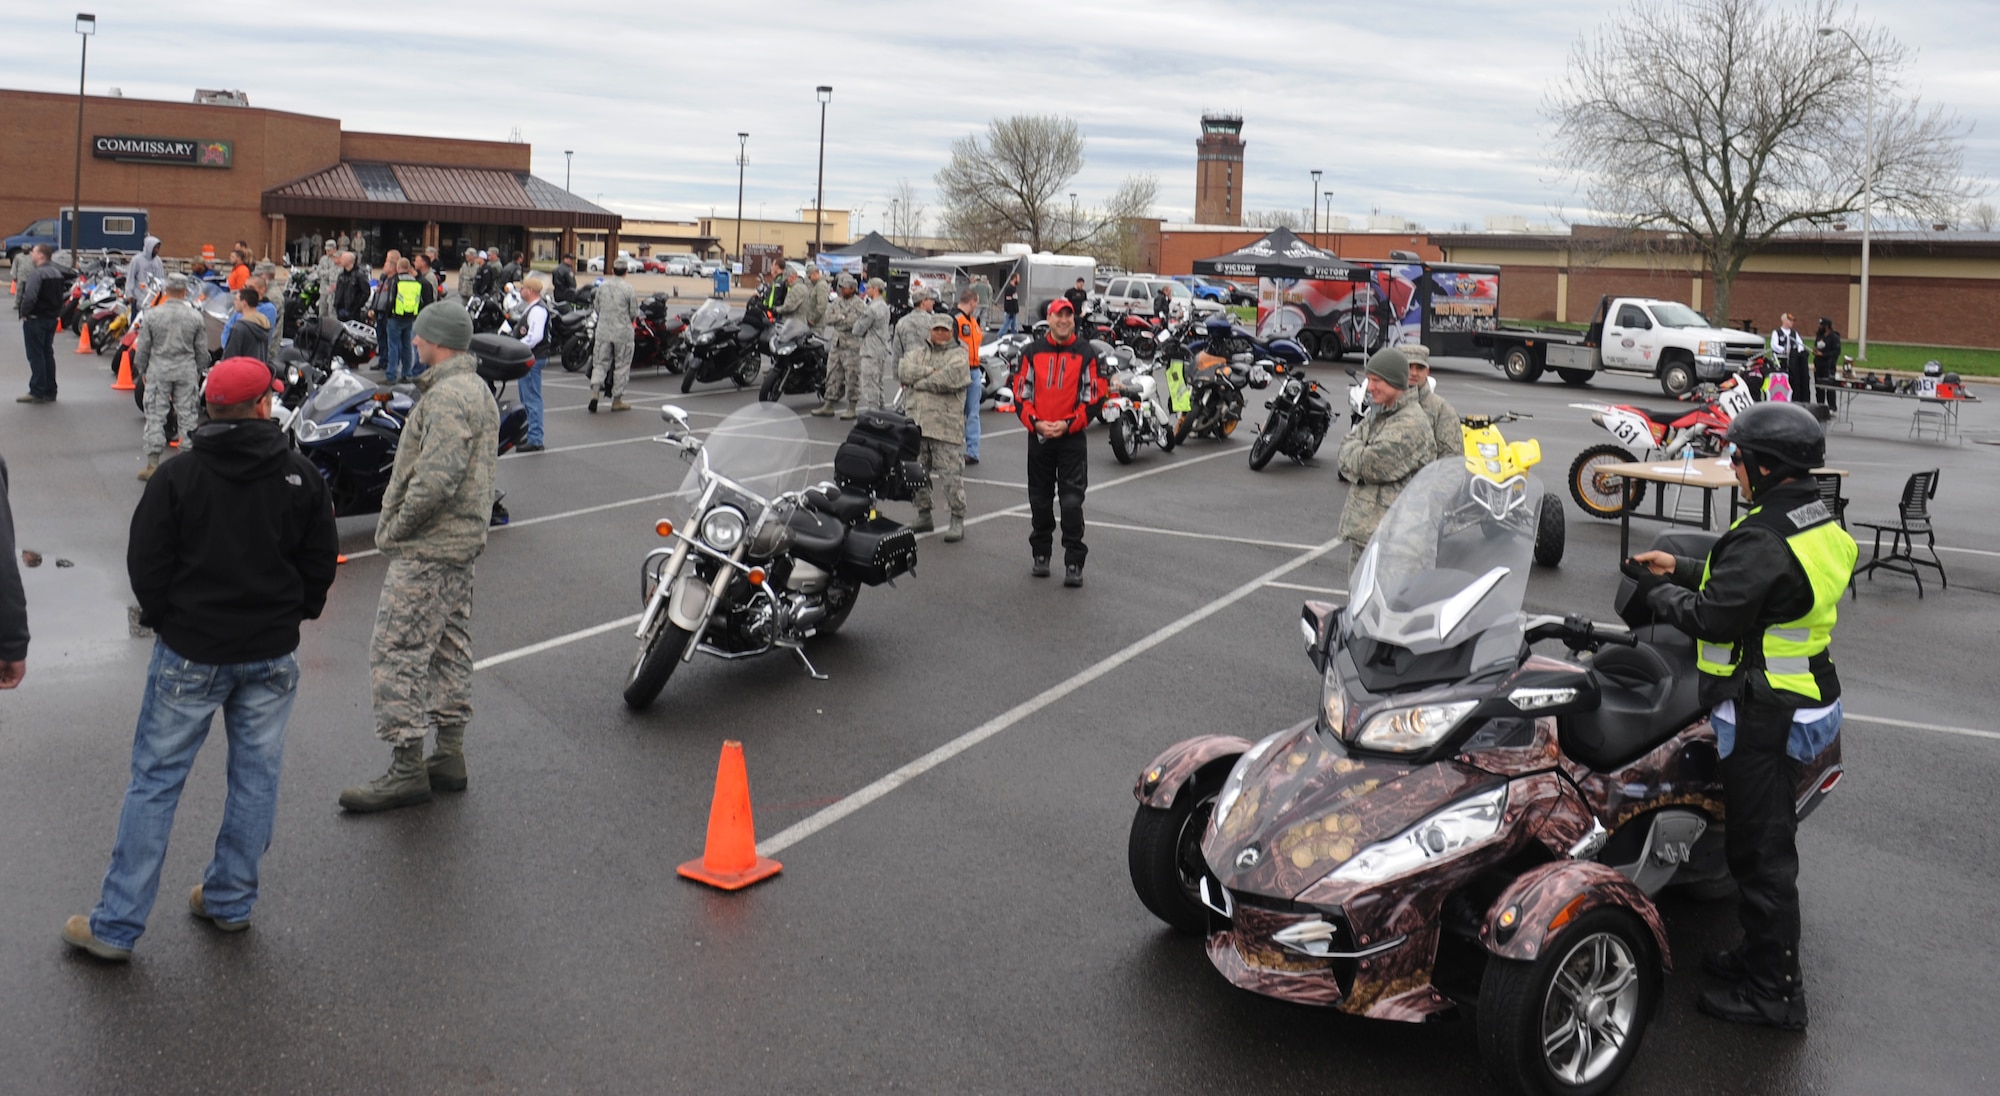 Members of Team Whiteman participate in the annual Motorcycle Awareness and Safety Day at Whiteman Air Force Base, Mo., April 15, 2013. The event was held in the commissary parking lot to raise awareness for safe motorcycle riding practices. (U.S. Air Force photo by Airman 1st Class Bryan Crane/Released)